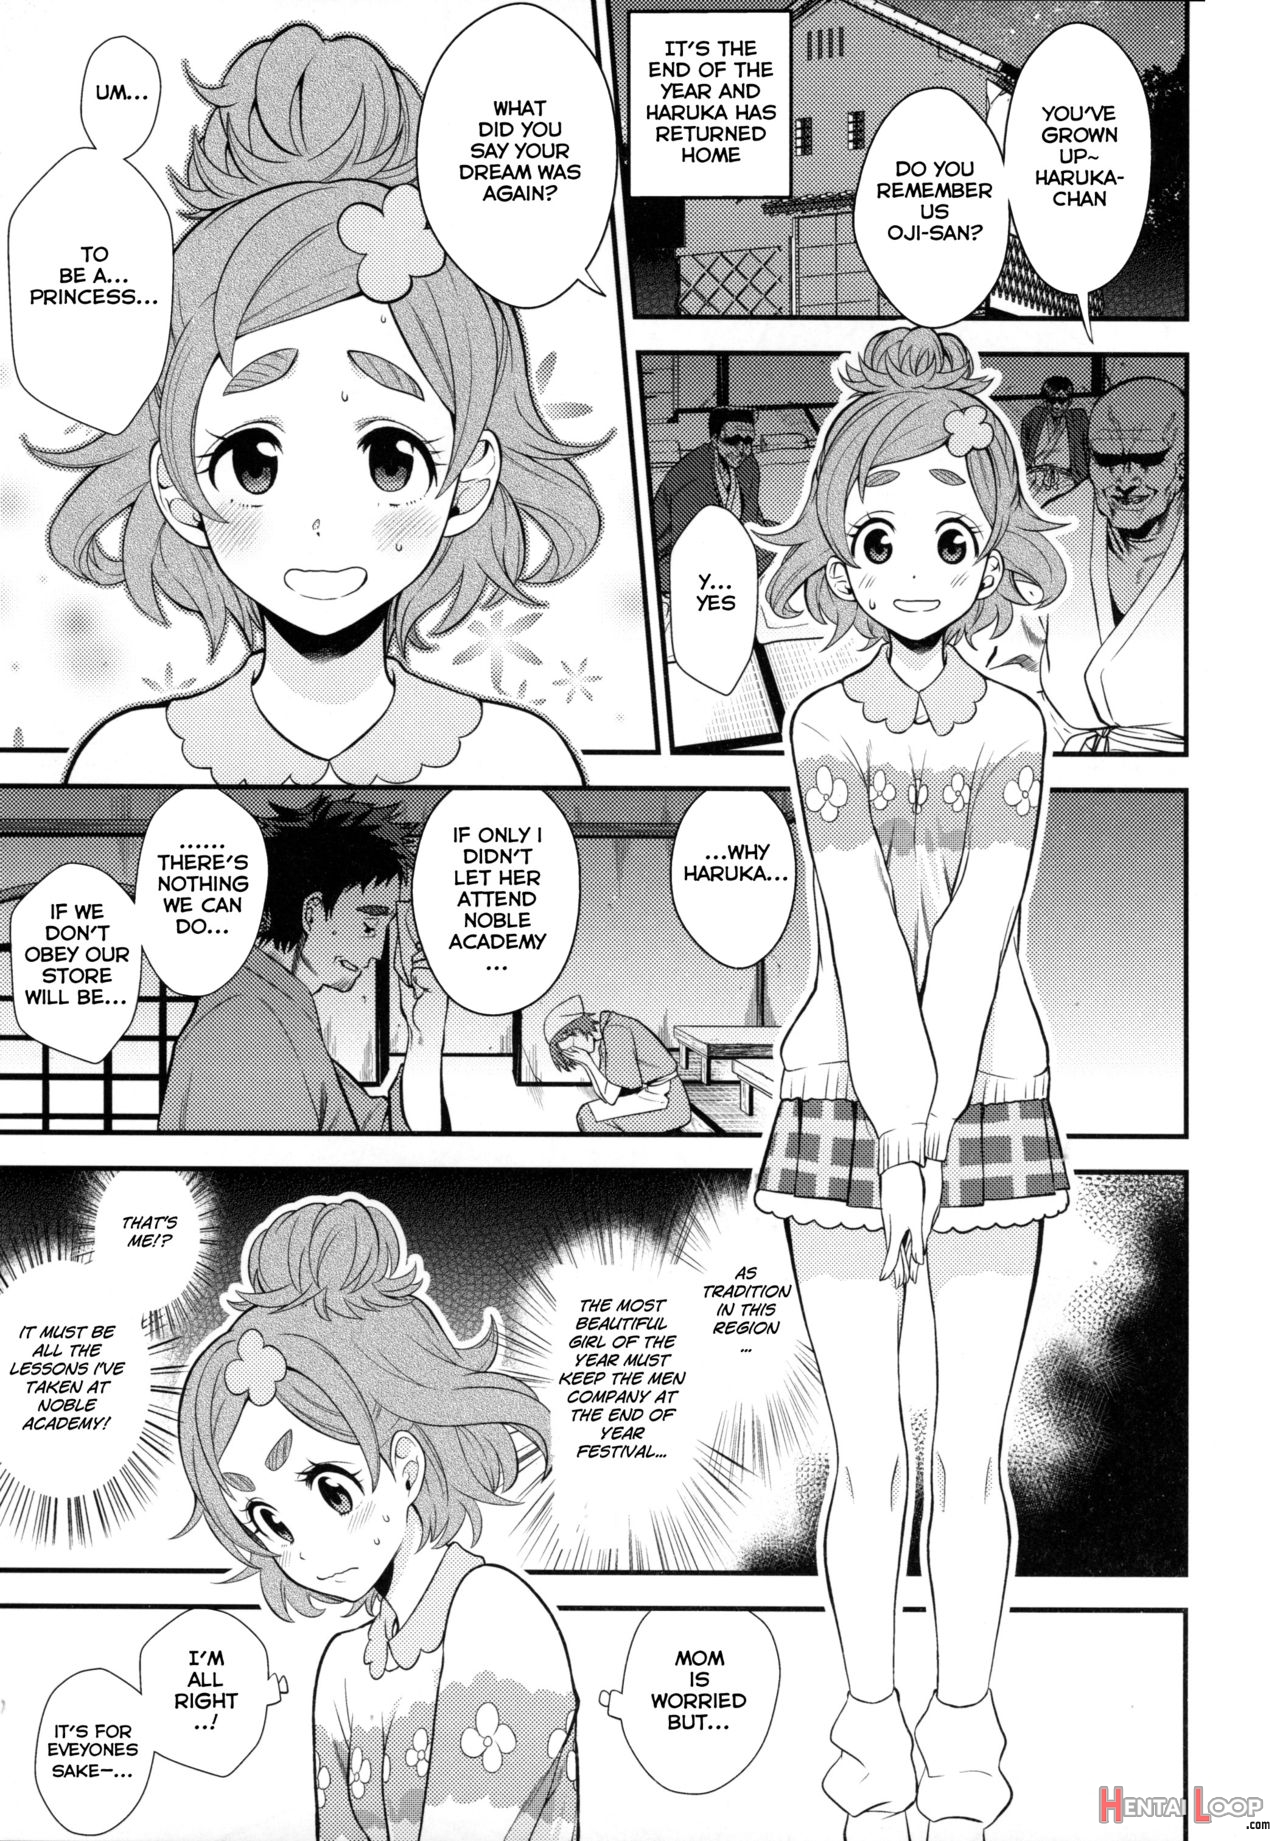 The Haru Household's Daughter page 2